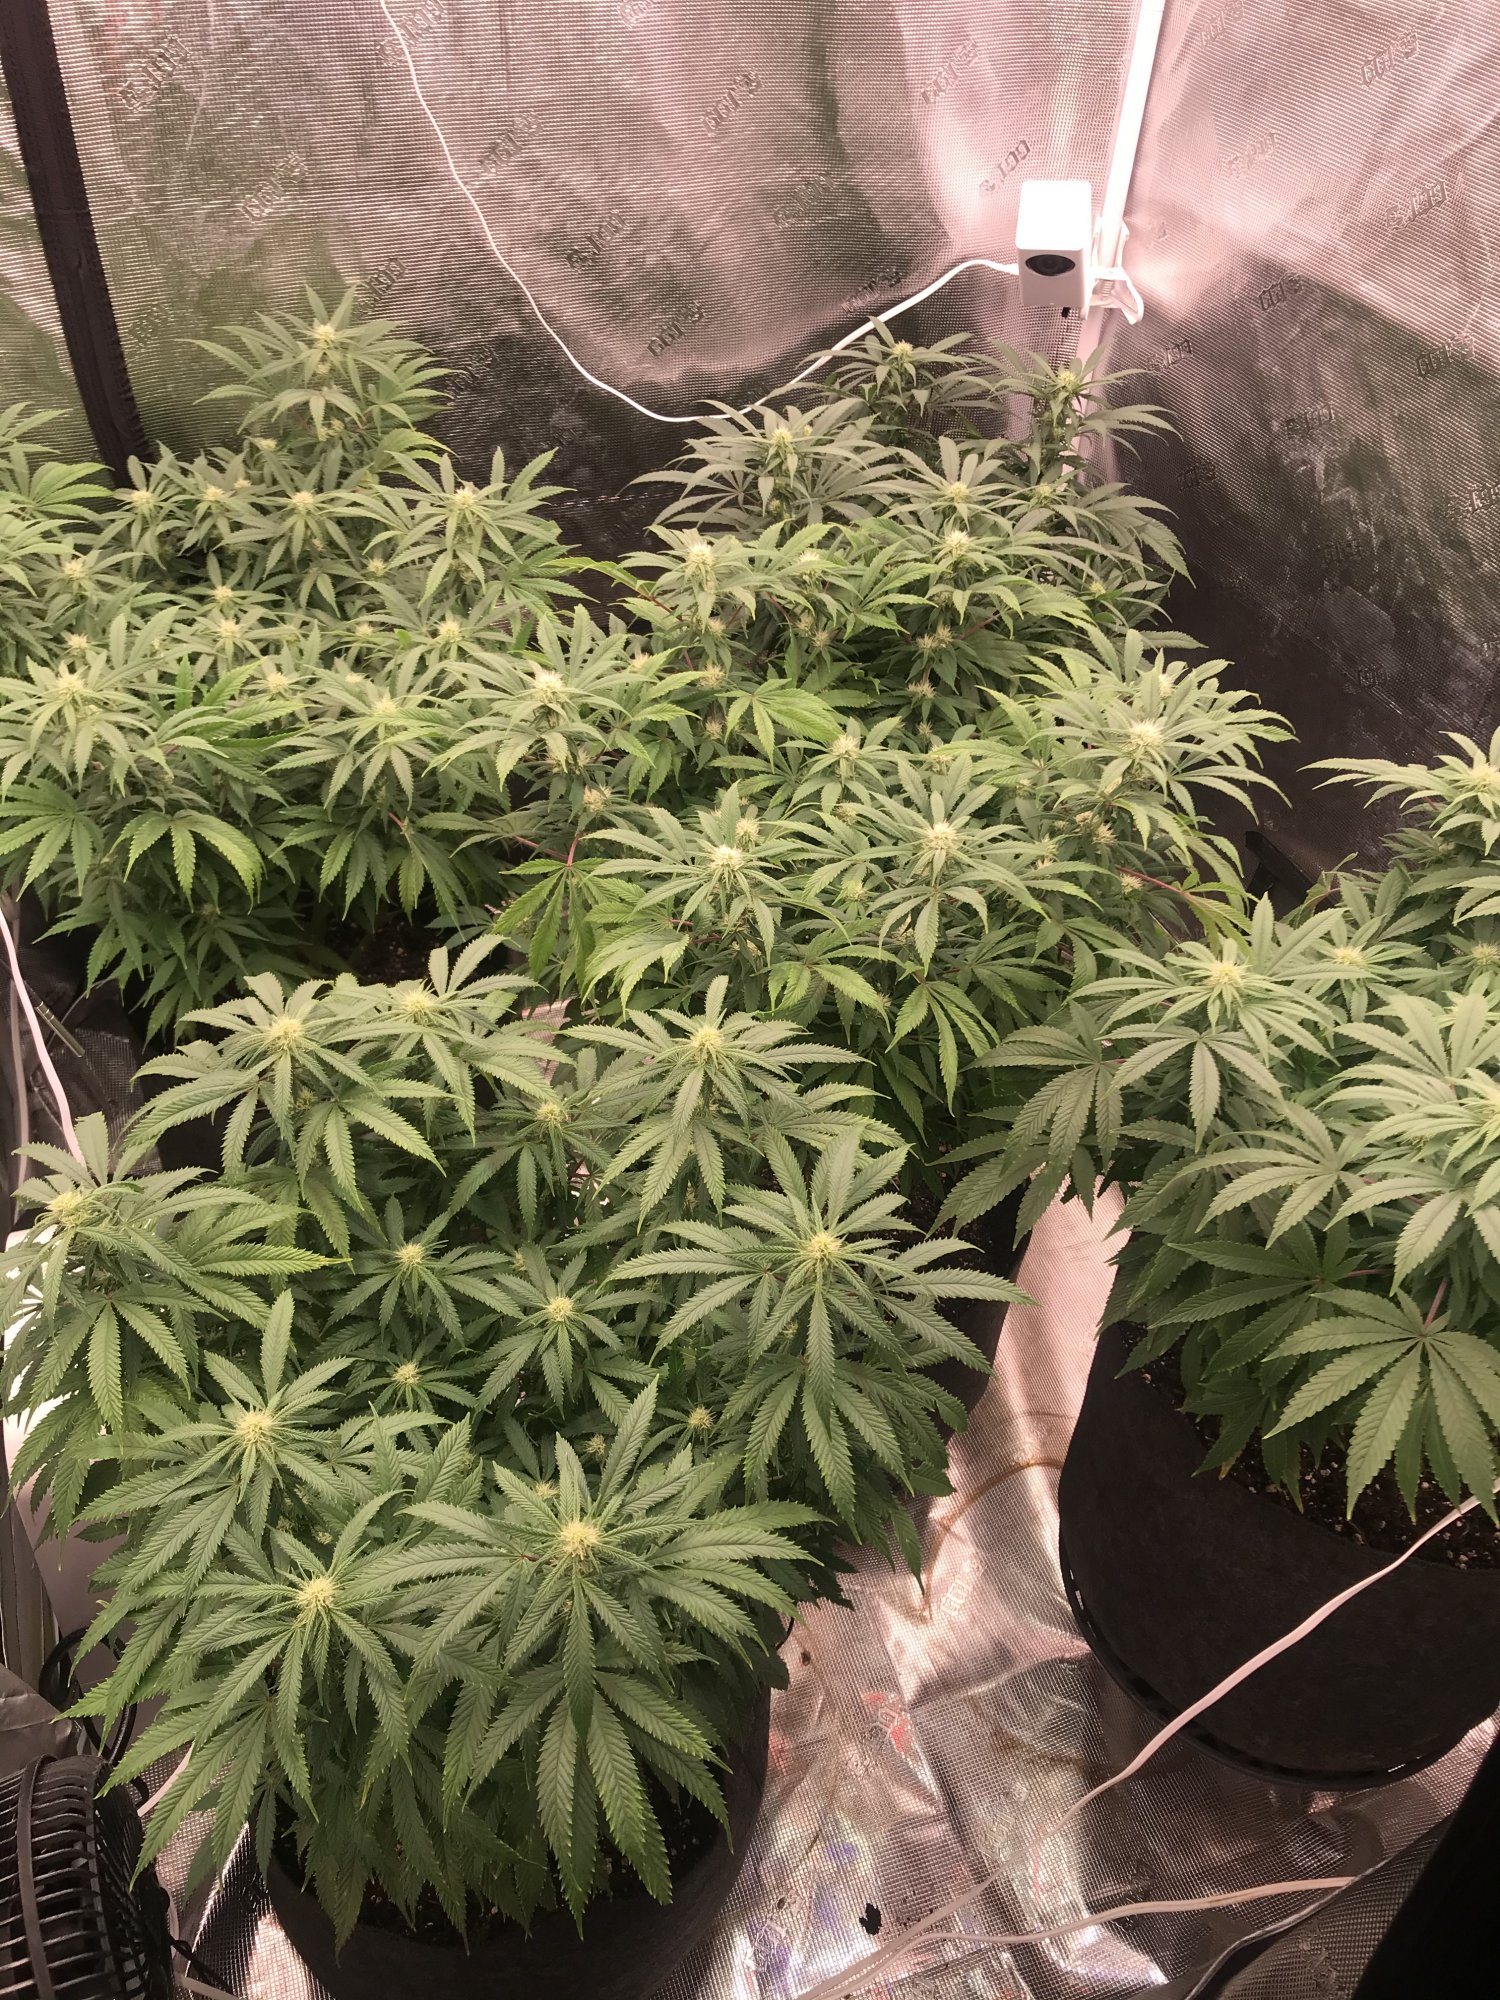 Day 21 into flower progression question